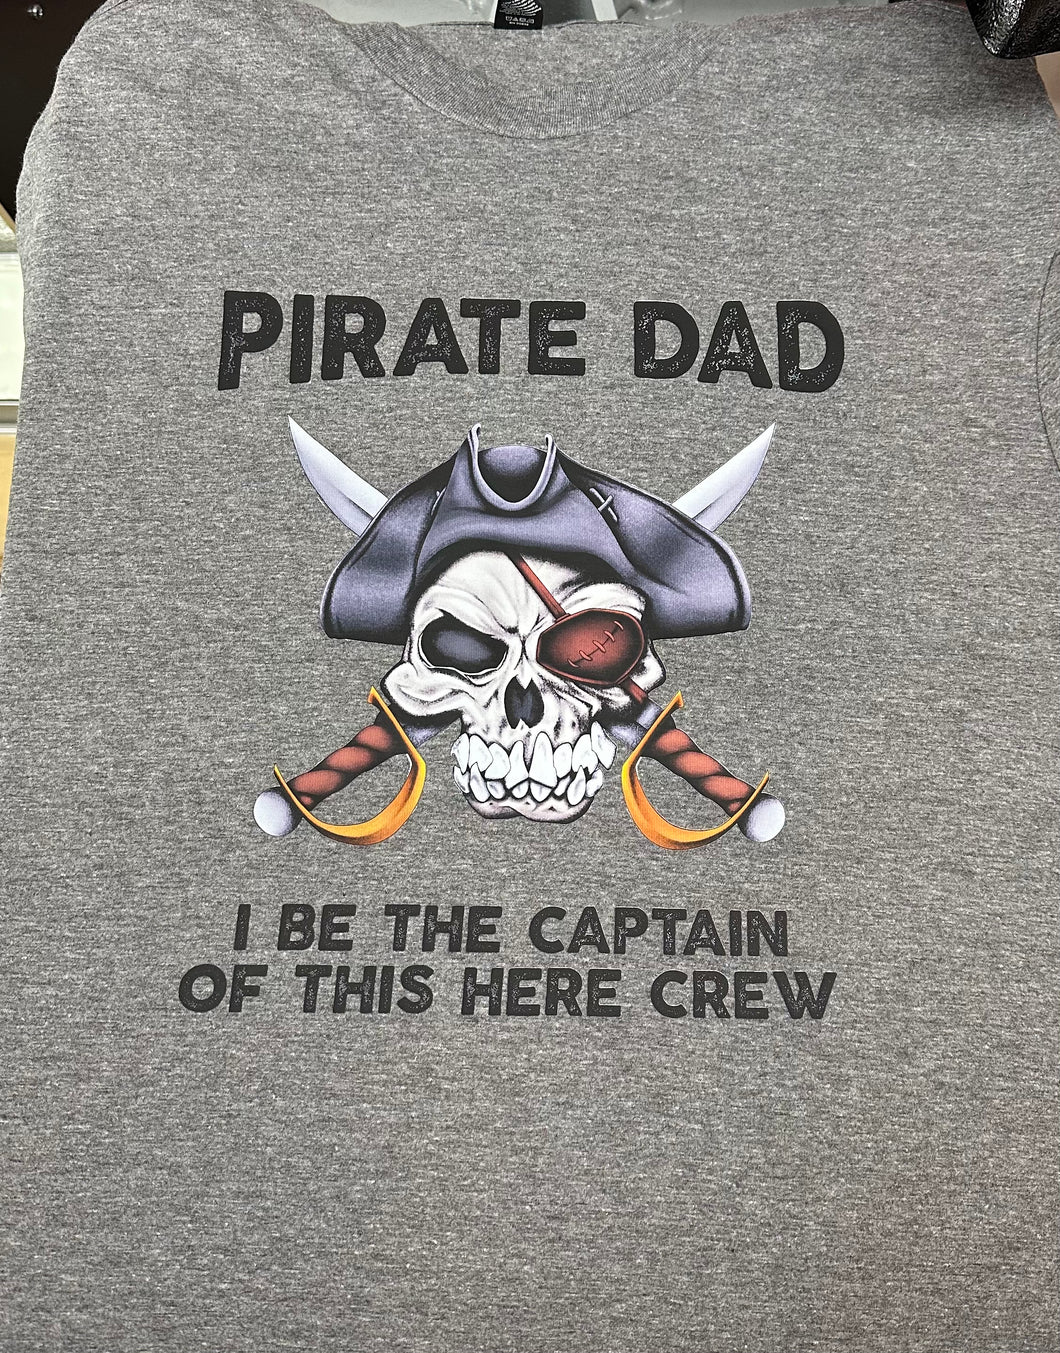 Pirate Dad, I be the captain!